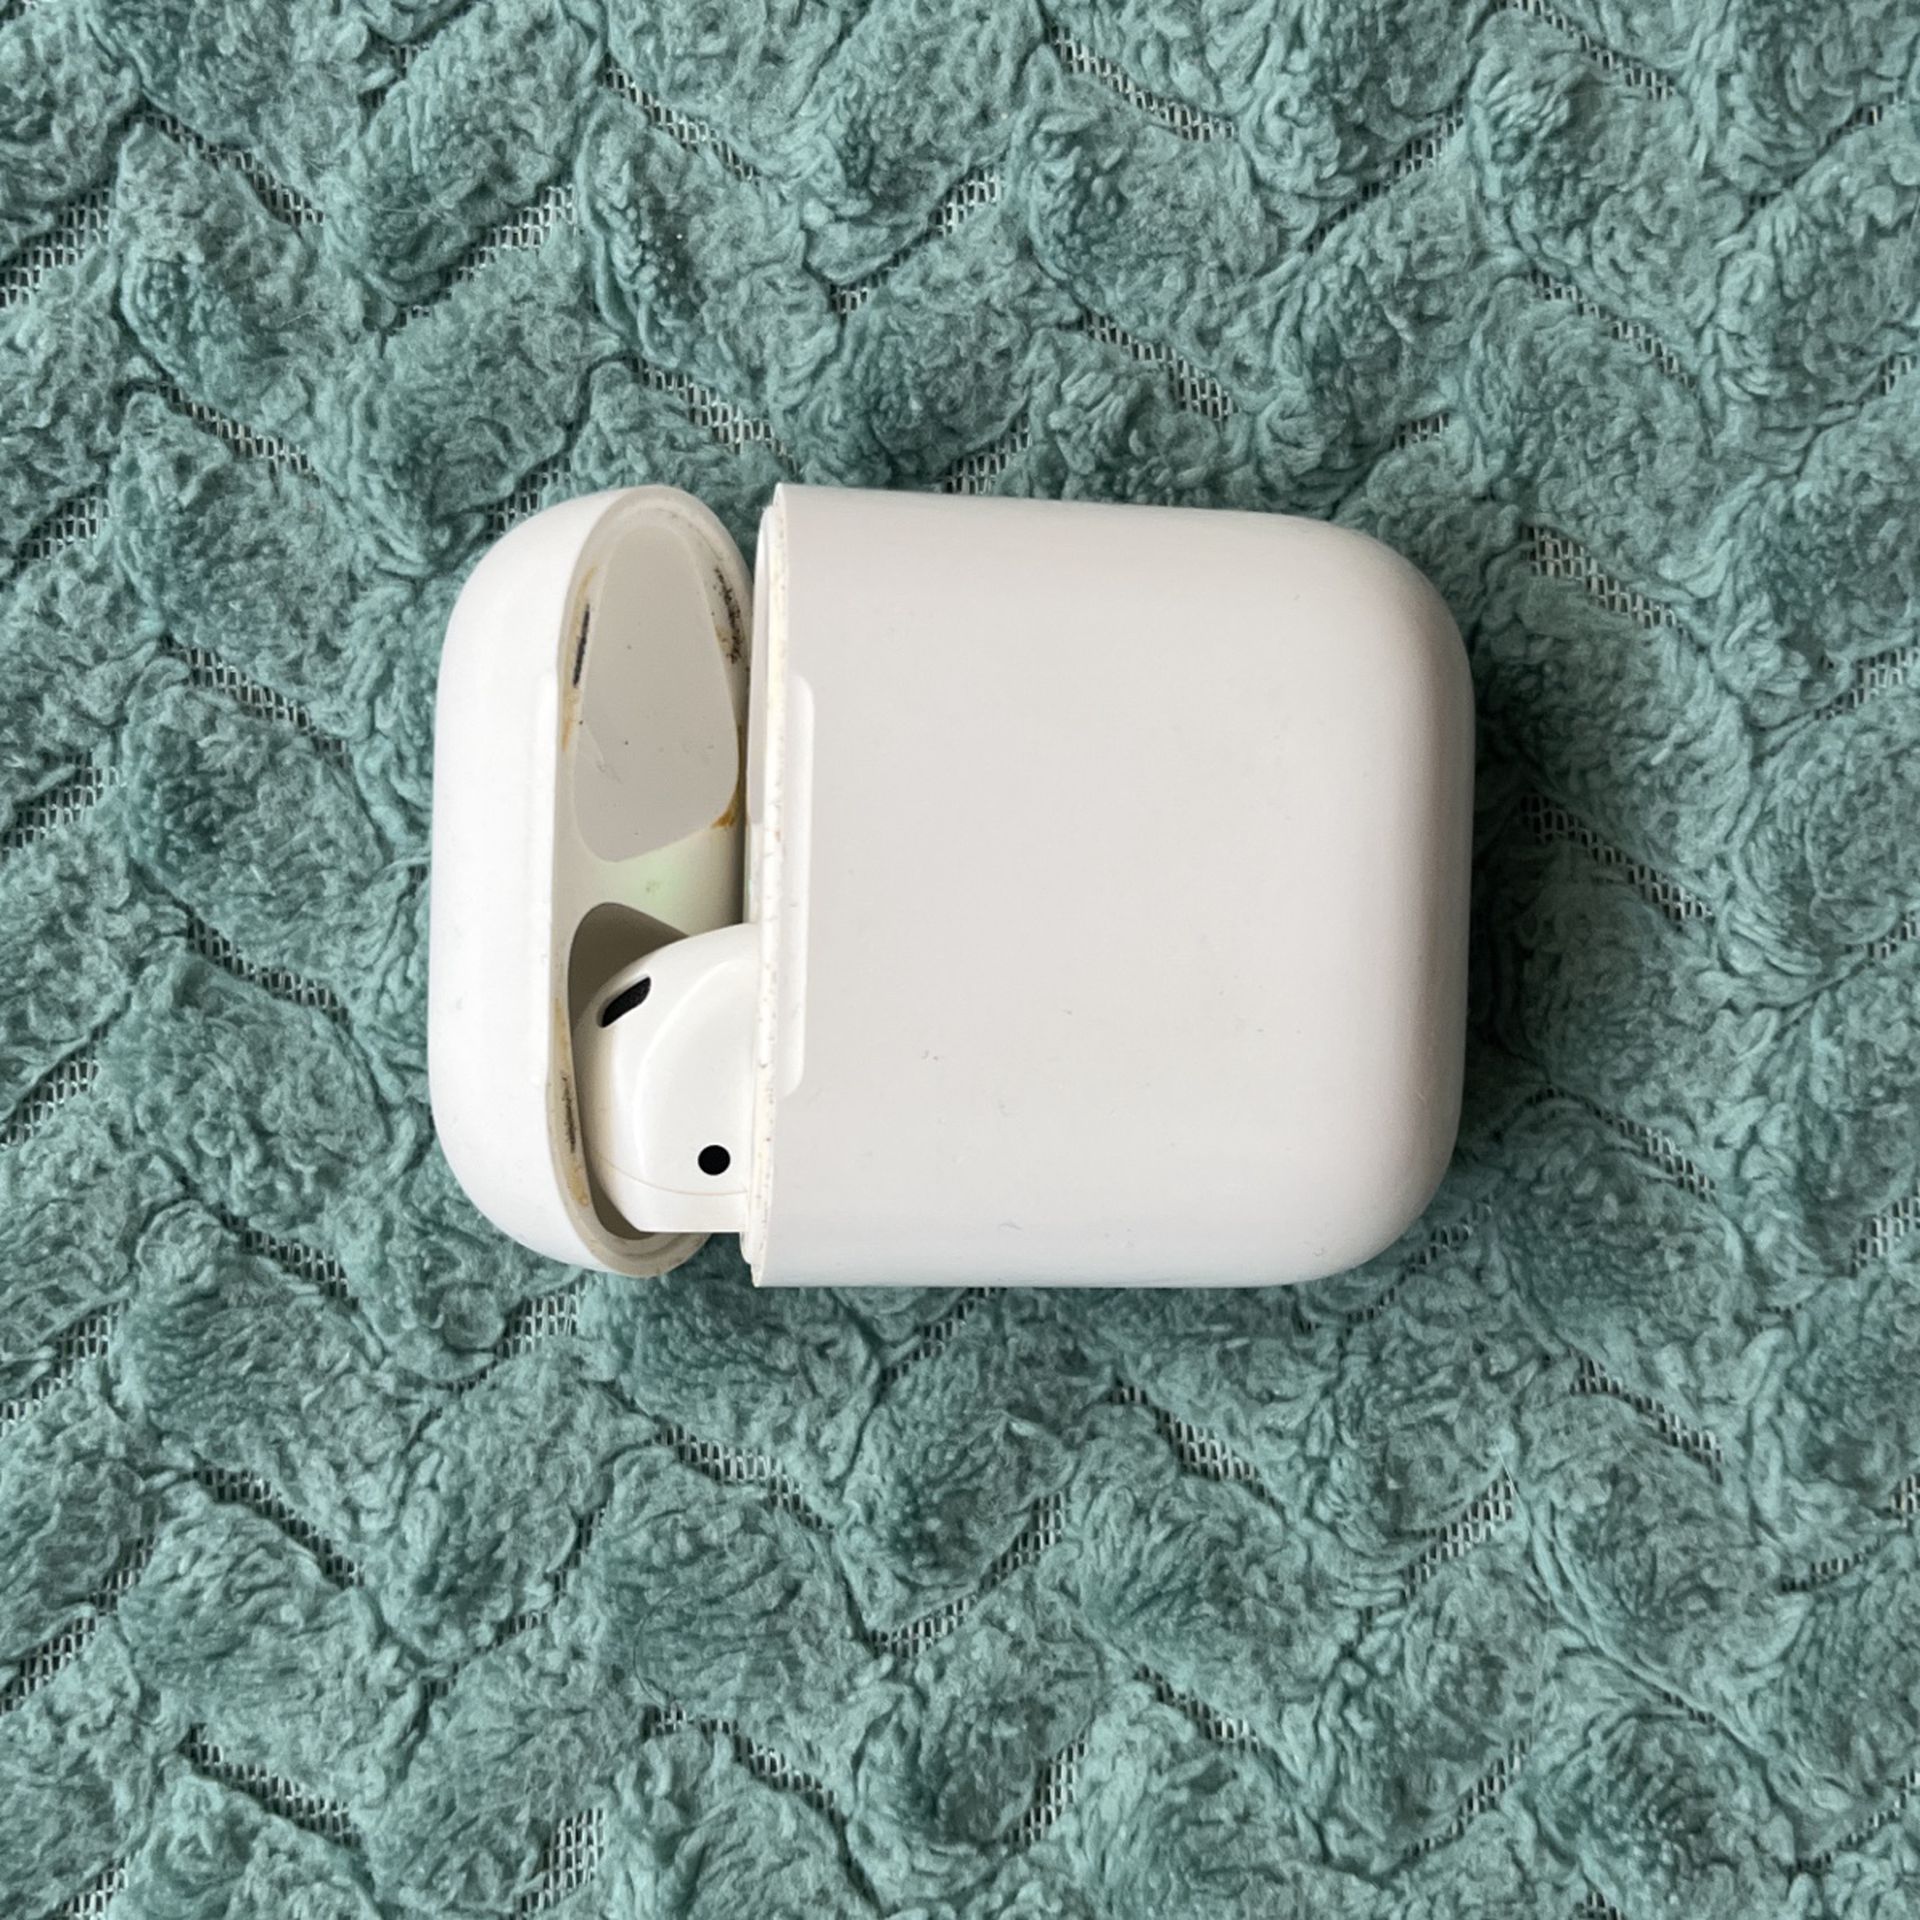 AirPods (2nd Gen) (Missing Earbud)